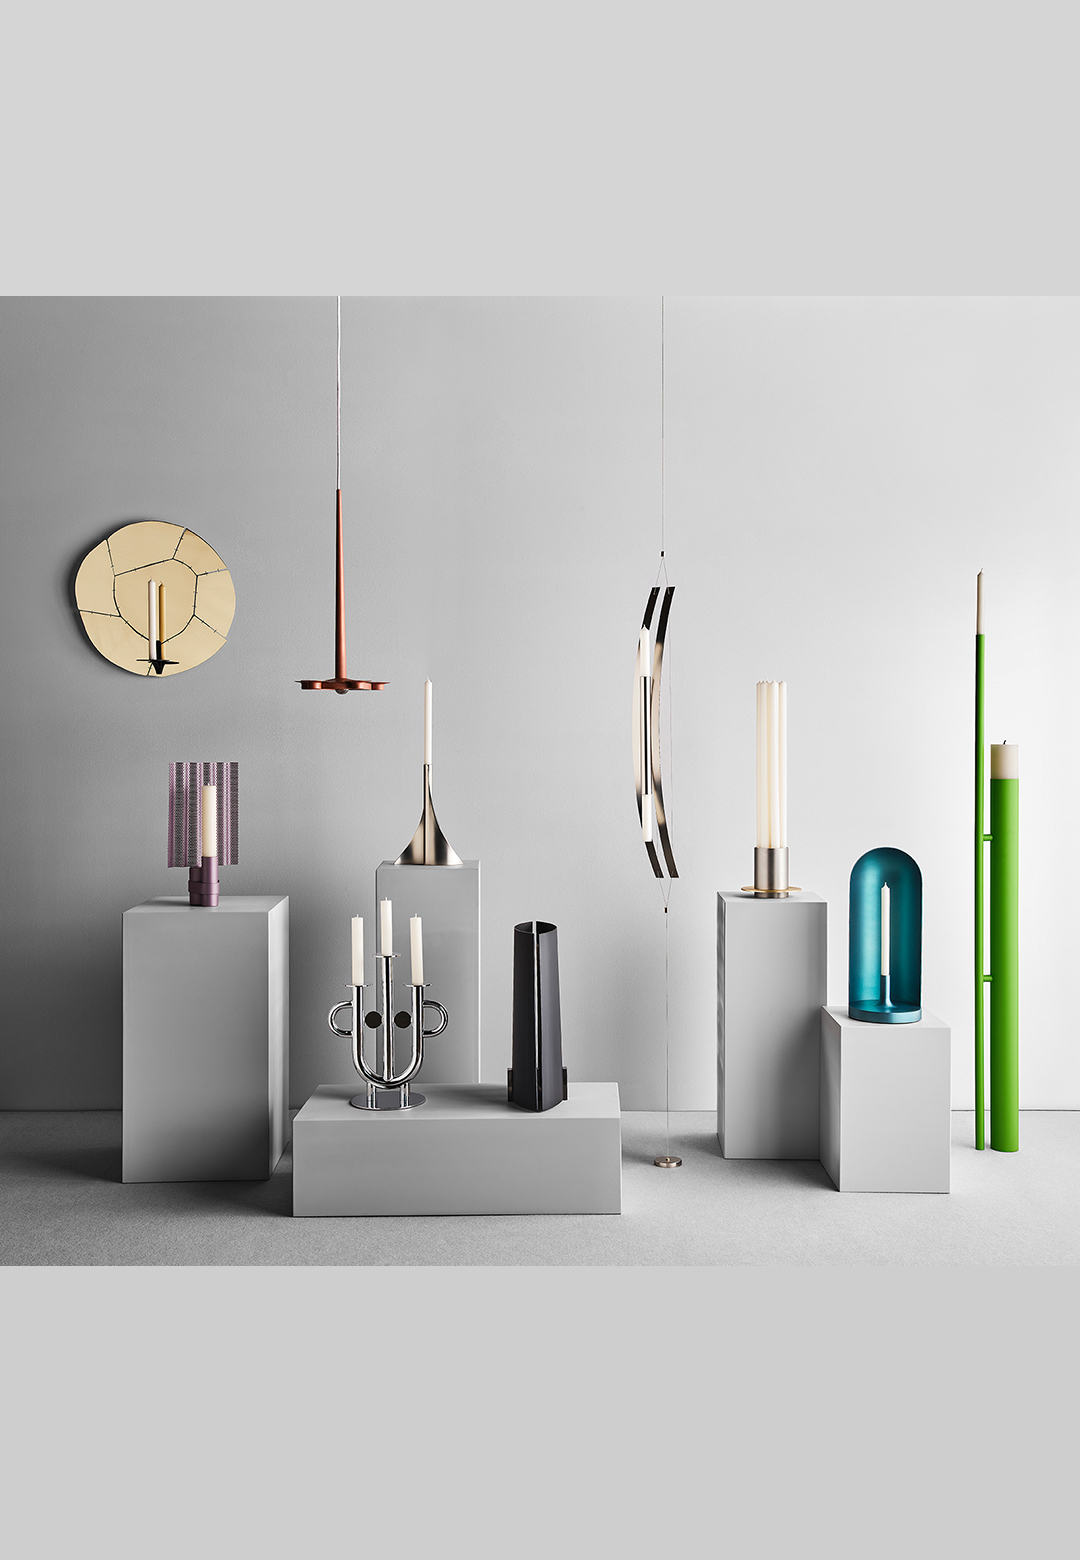 Marcel Wanders studio and Mingardo collaborate to raise funds for cancer